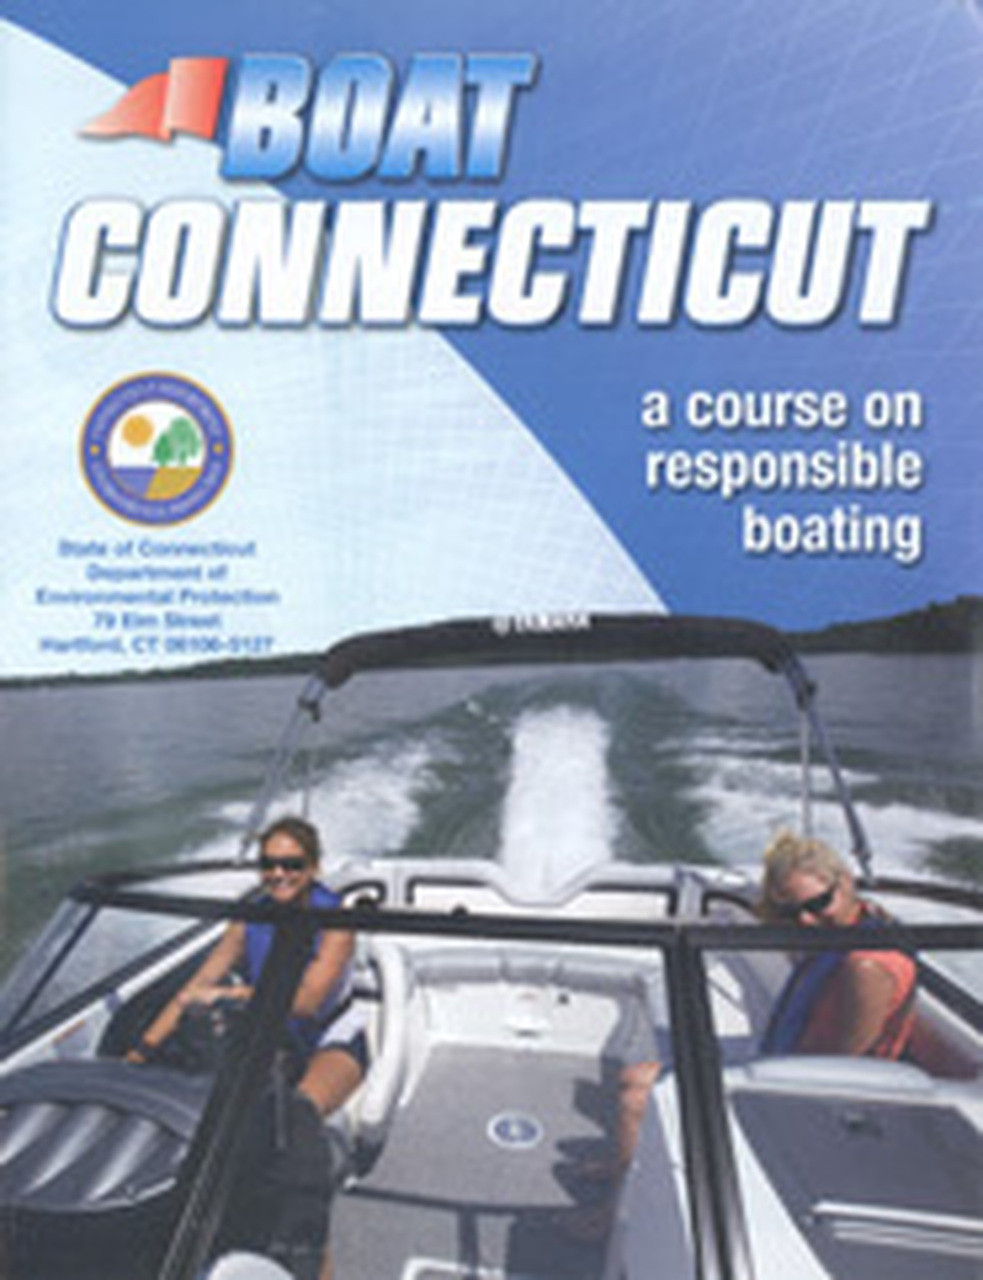 CT Boating & PWC Class, July 2, 2023, 10AM-6PM in E. Hartford, CT